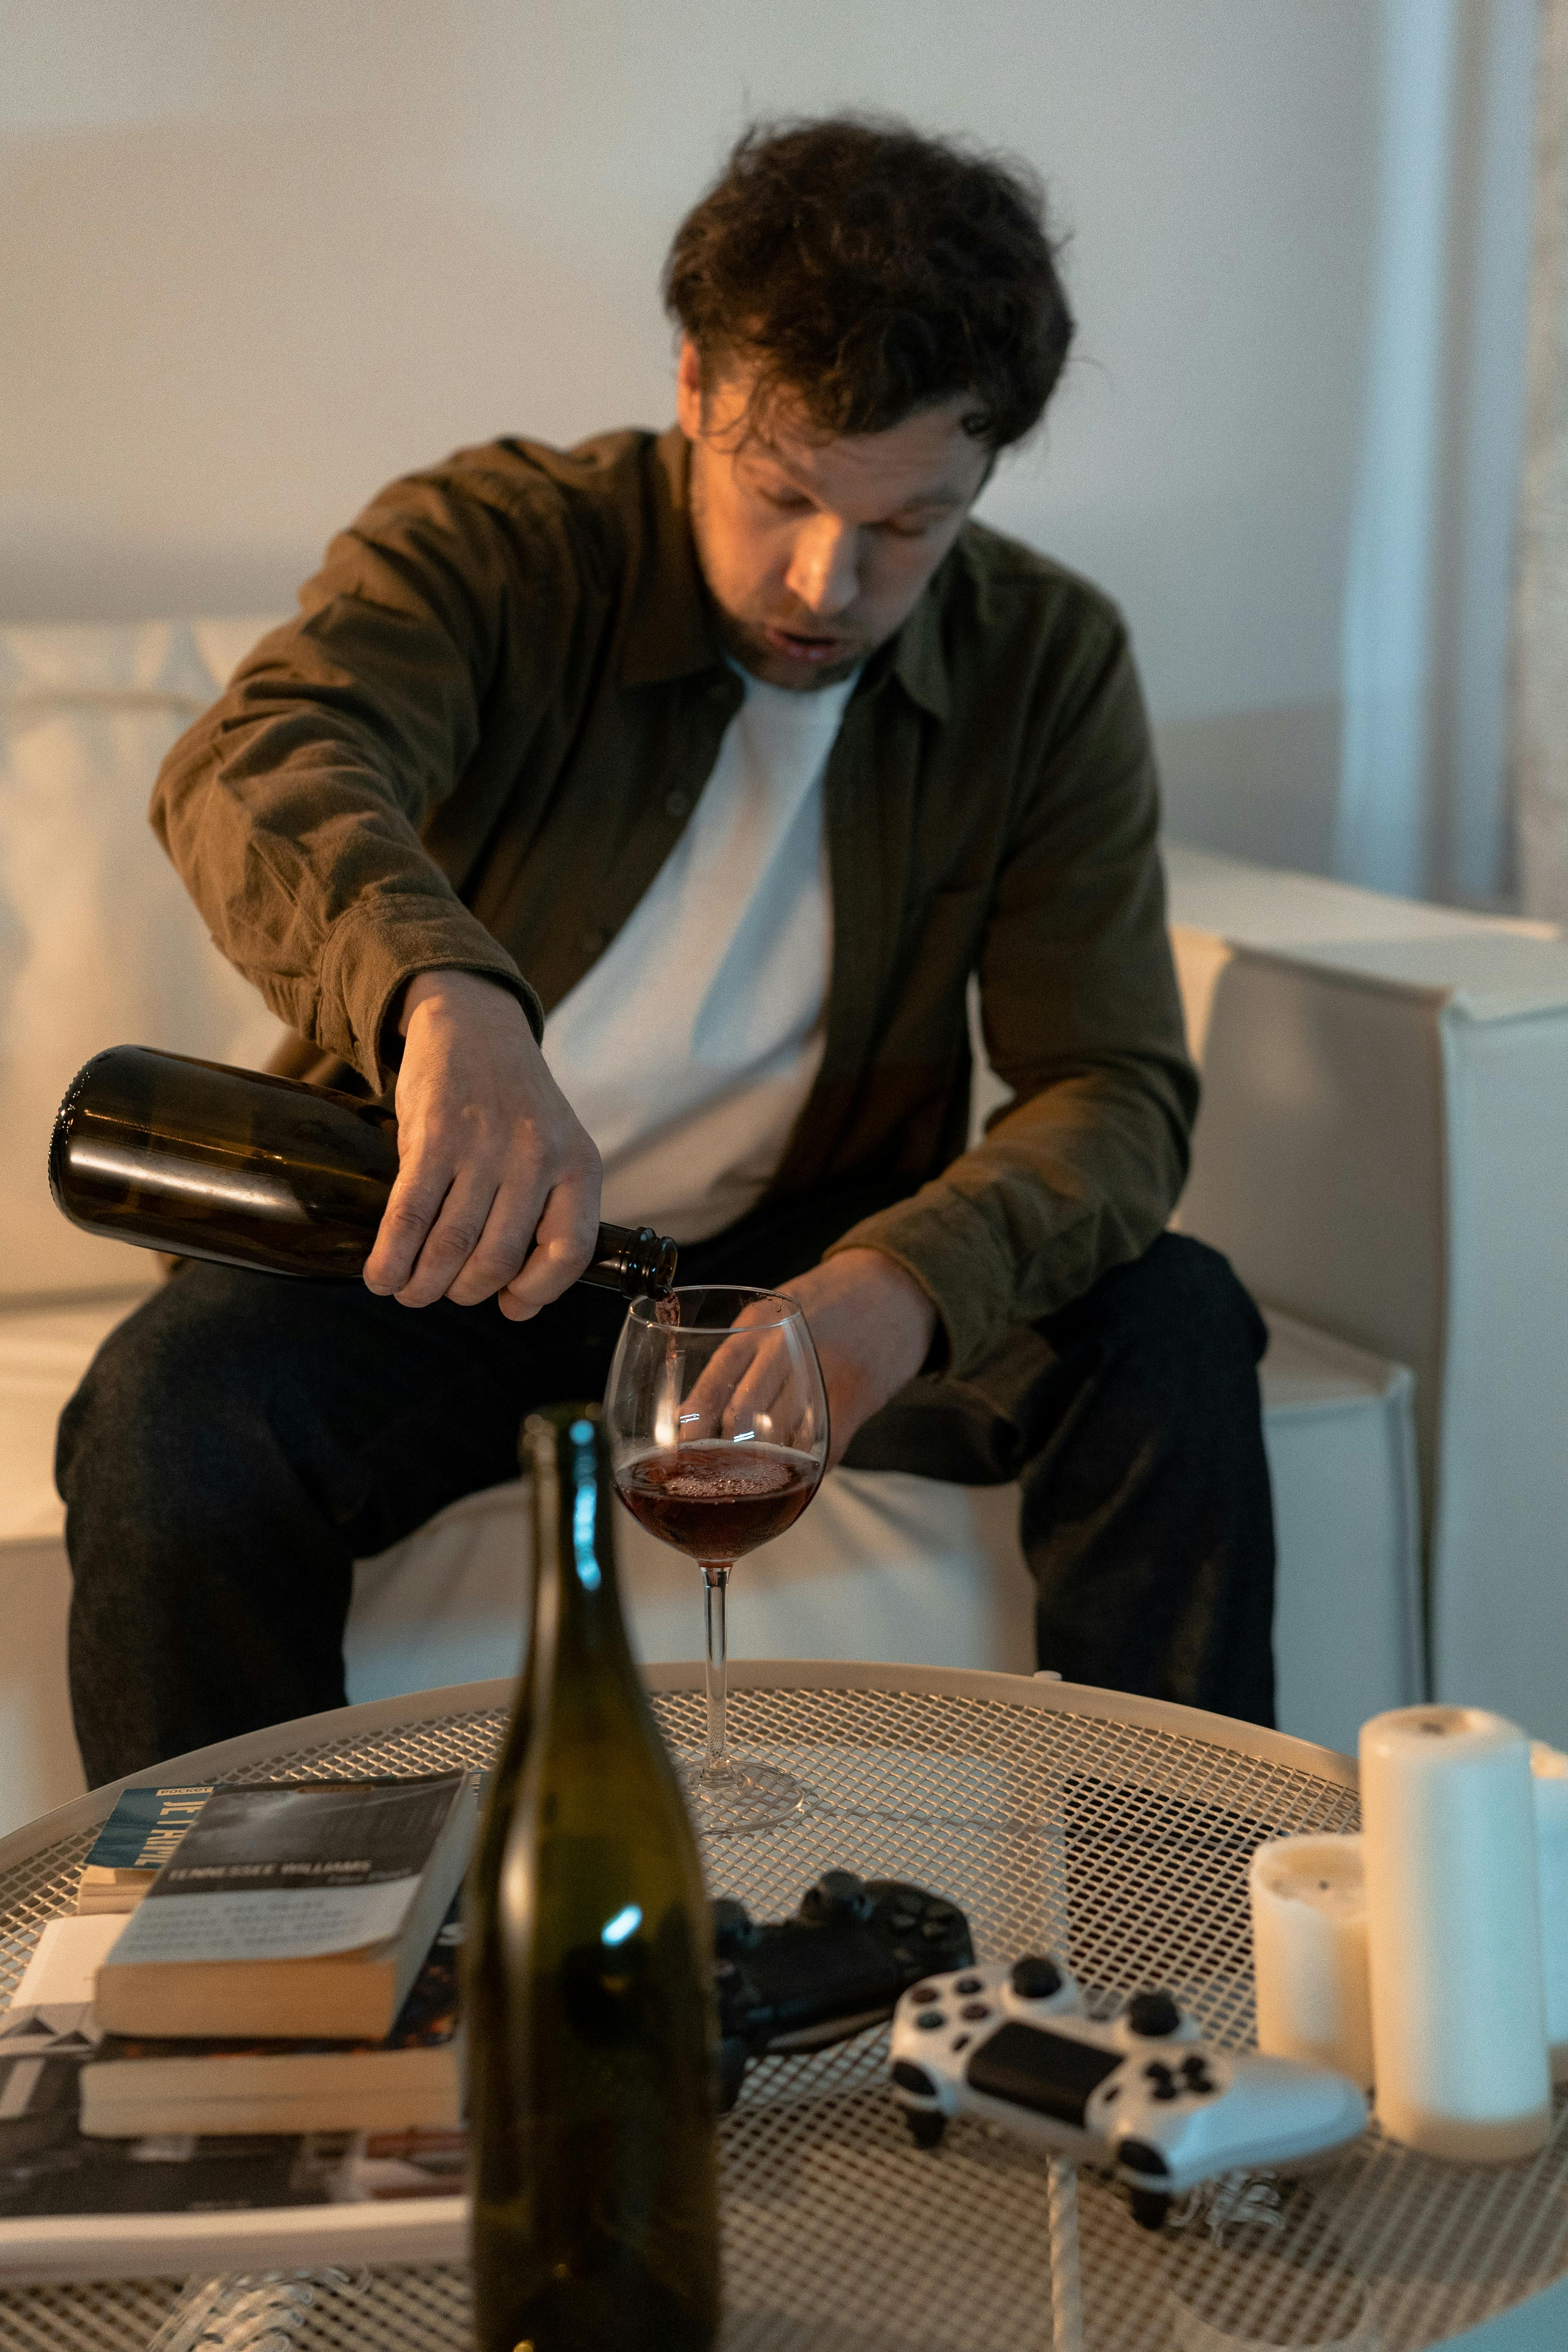 A drunk man pouring himself some wine | Source: Pexels